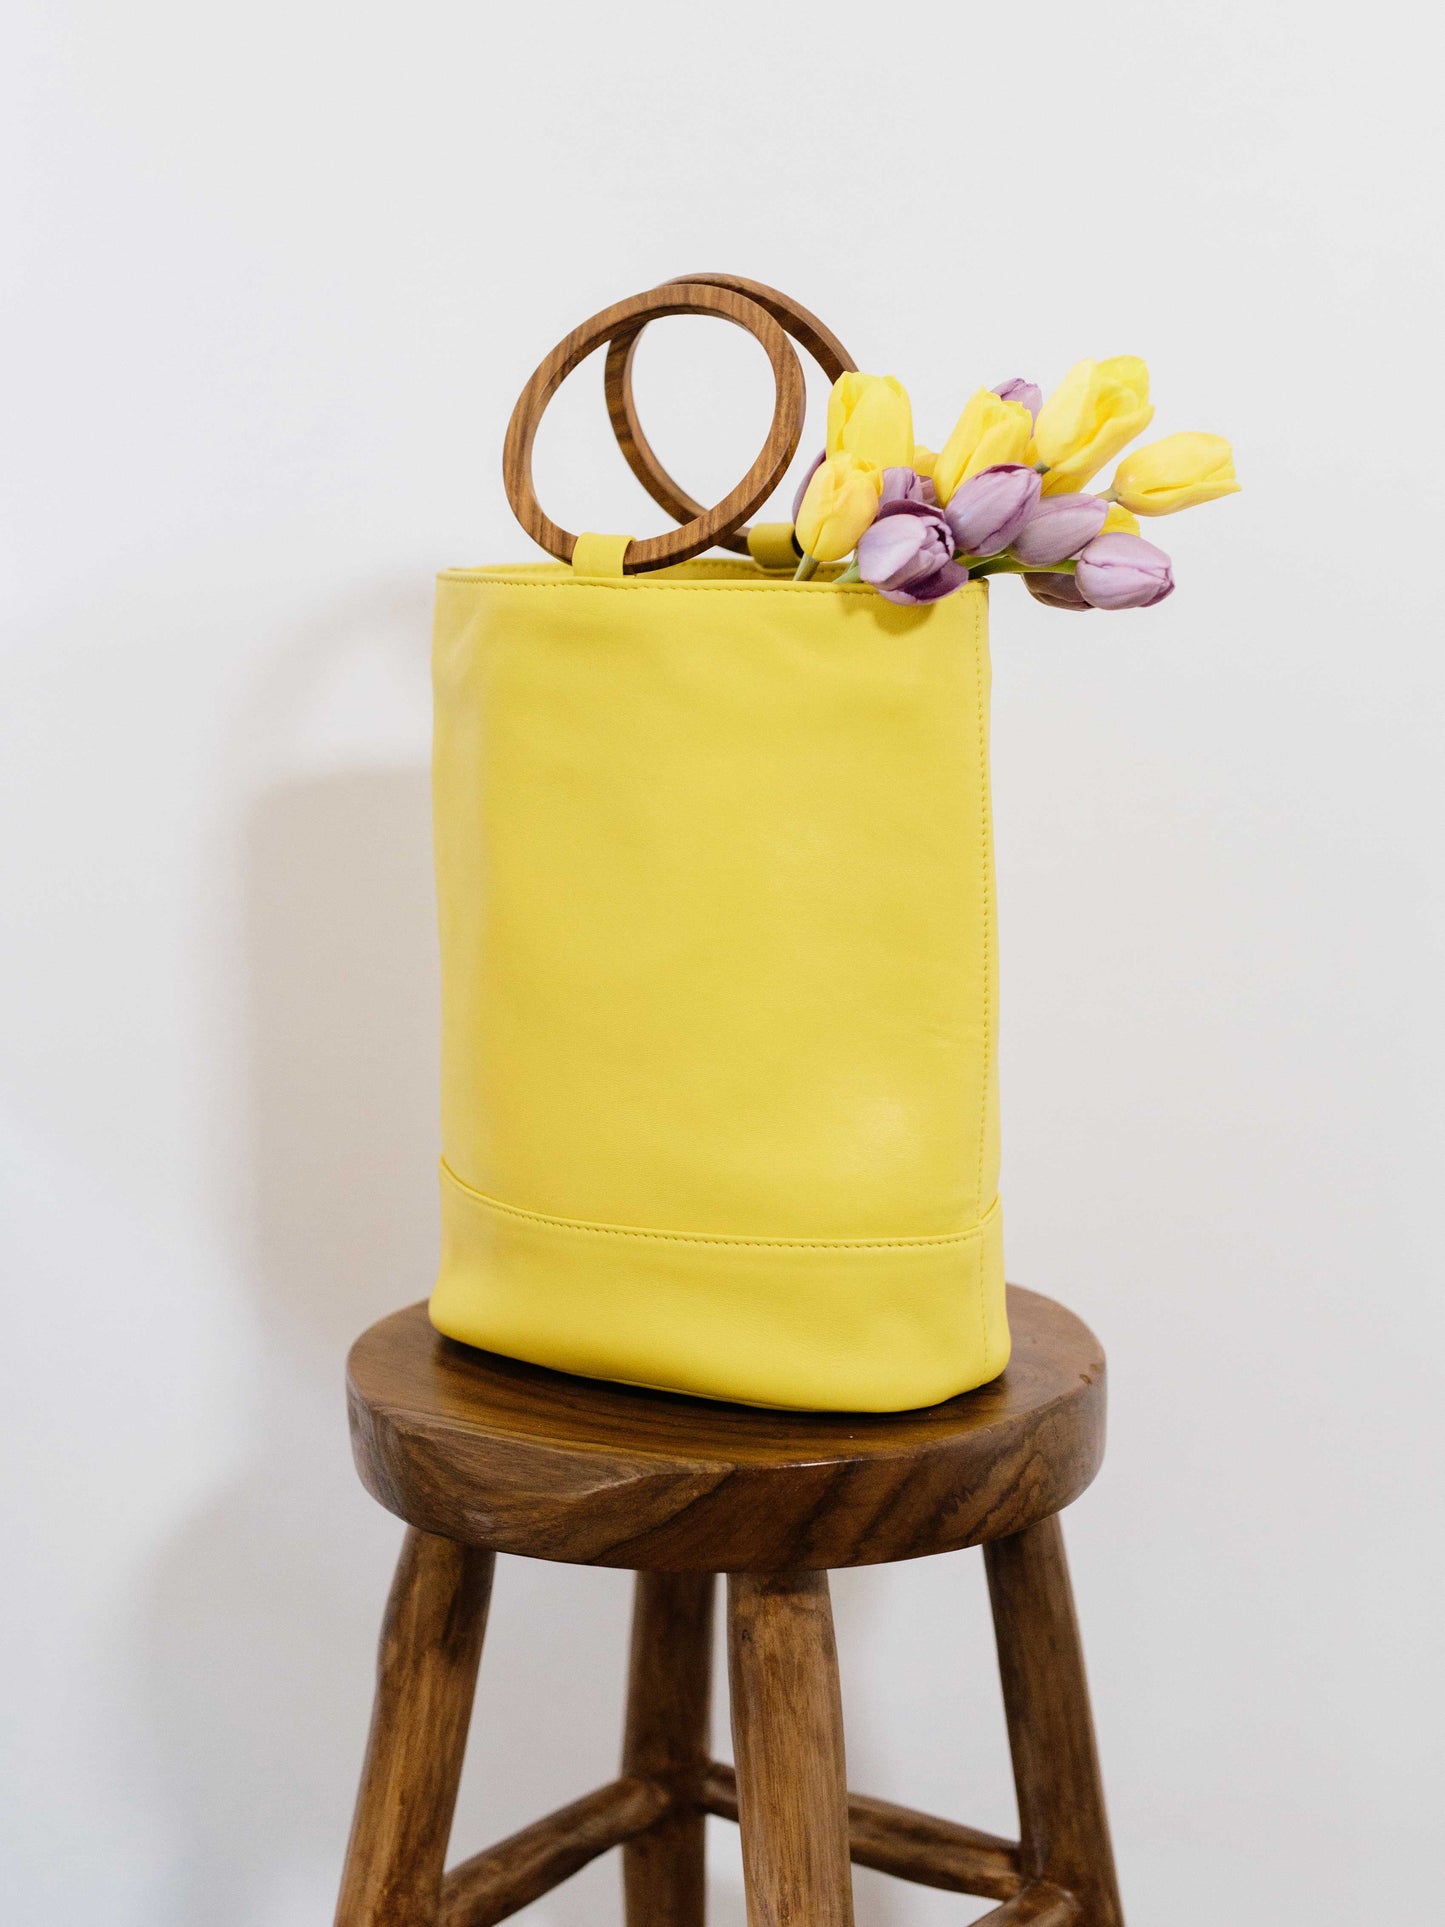 Leather Tote handbag on table with flowers sticking out -wood bucket tote lemon yellow color by payton james